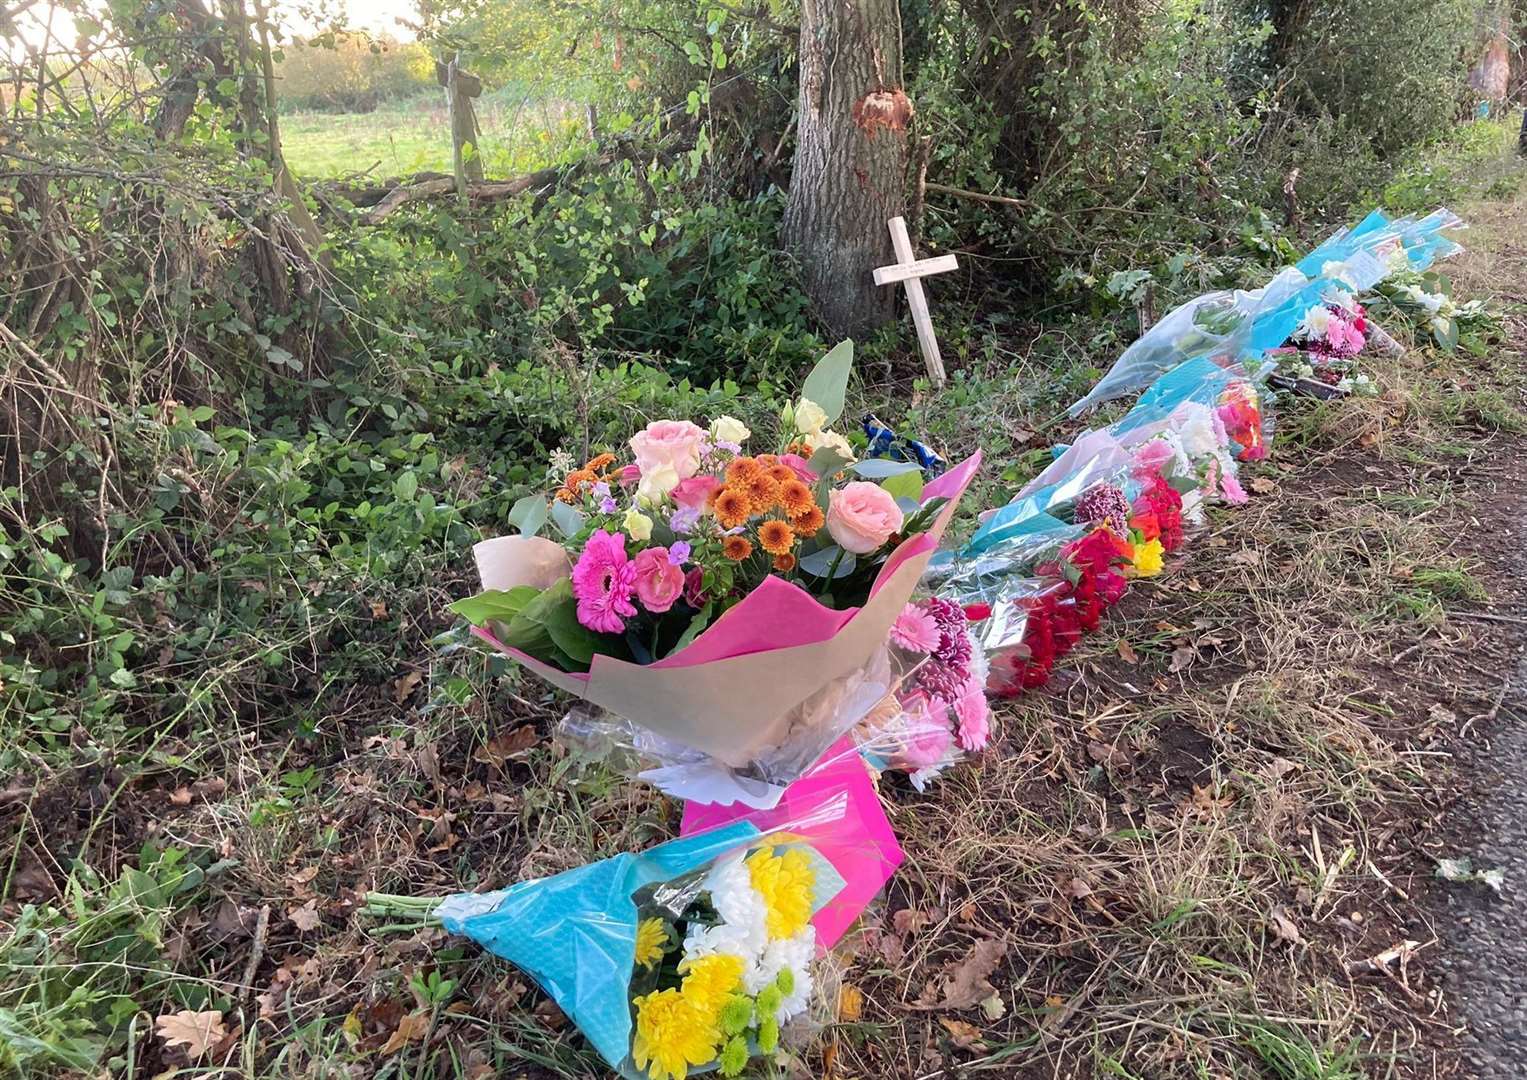 Floral tributes have been growing on the roadside